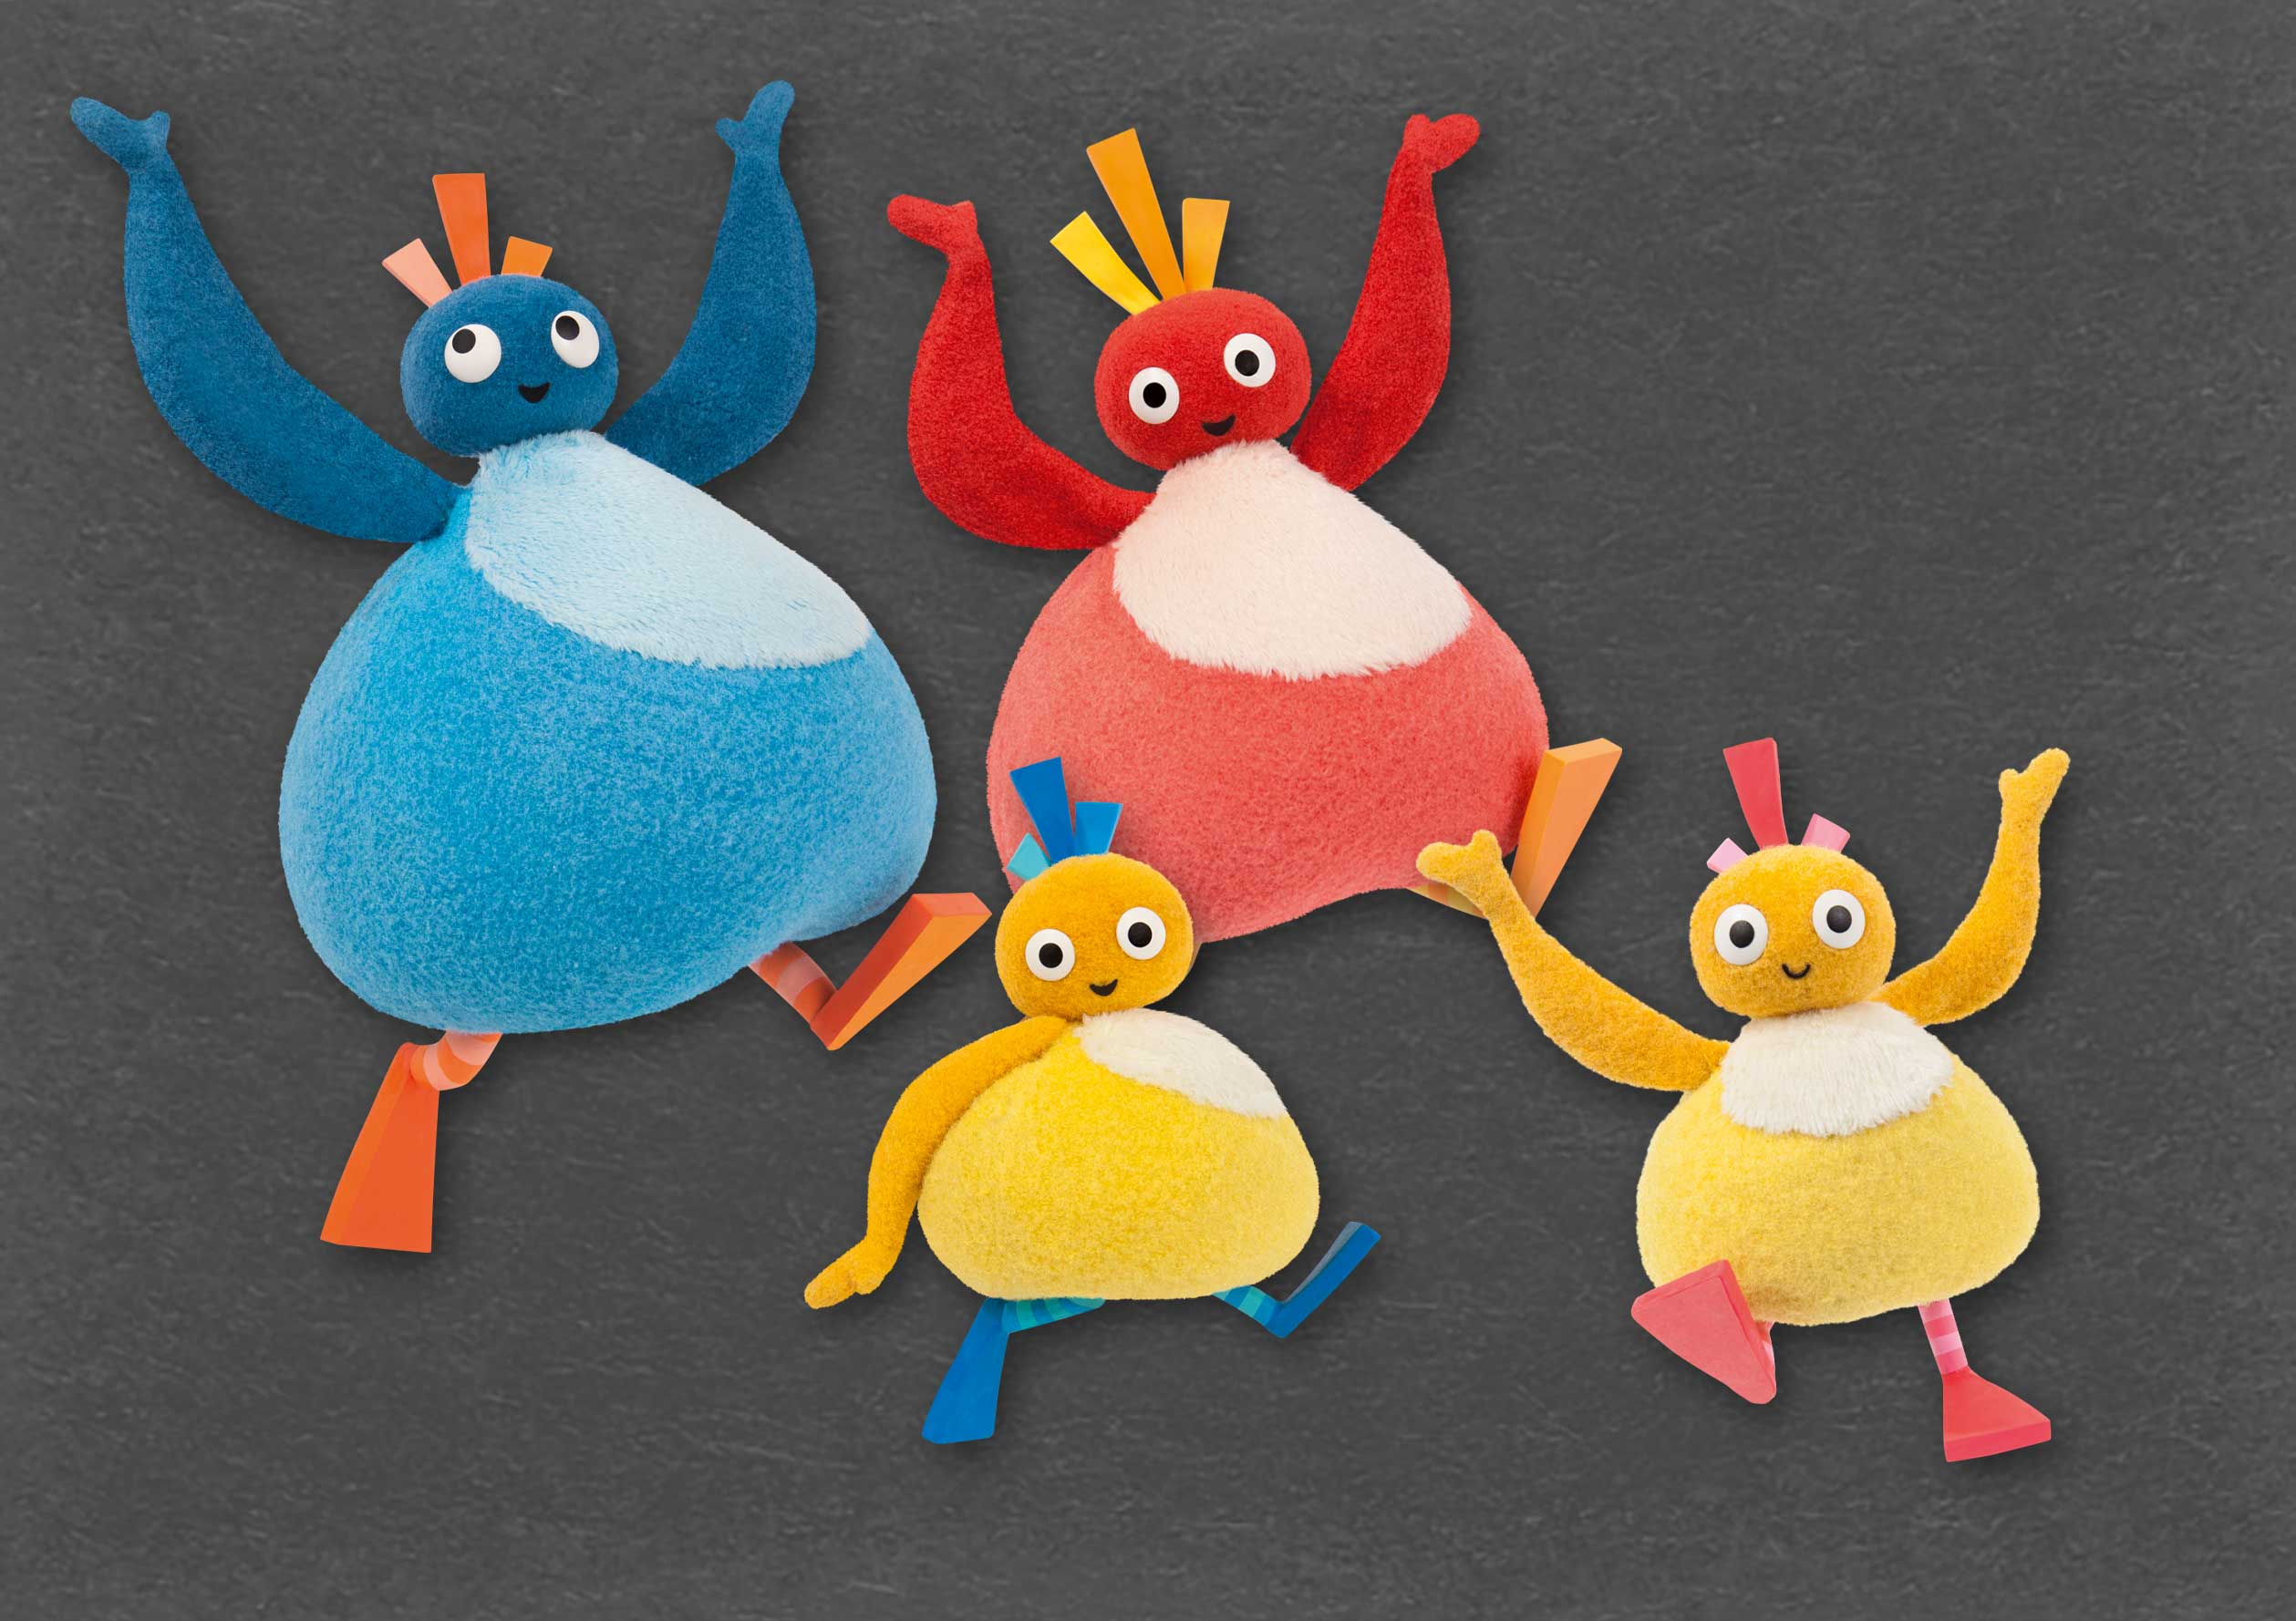 twirlywoos retouched characters